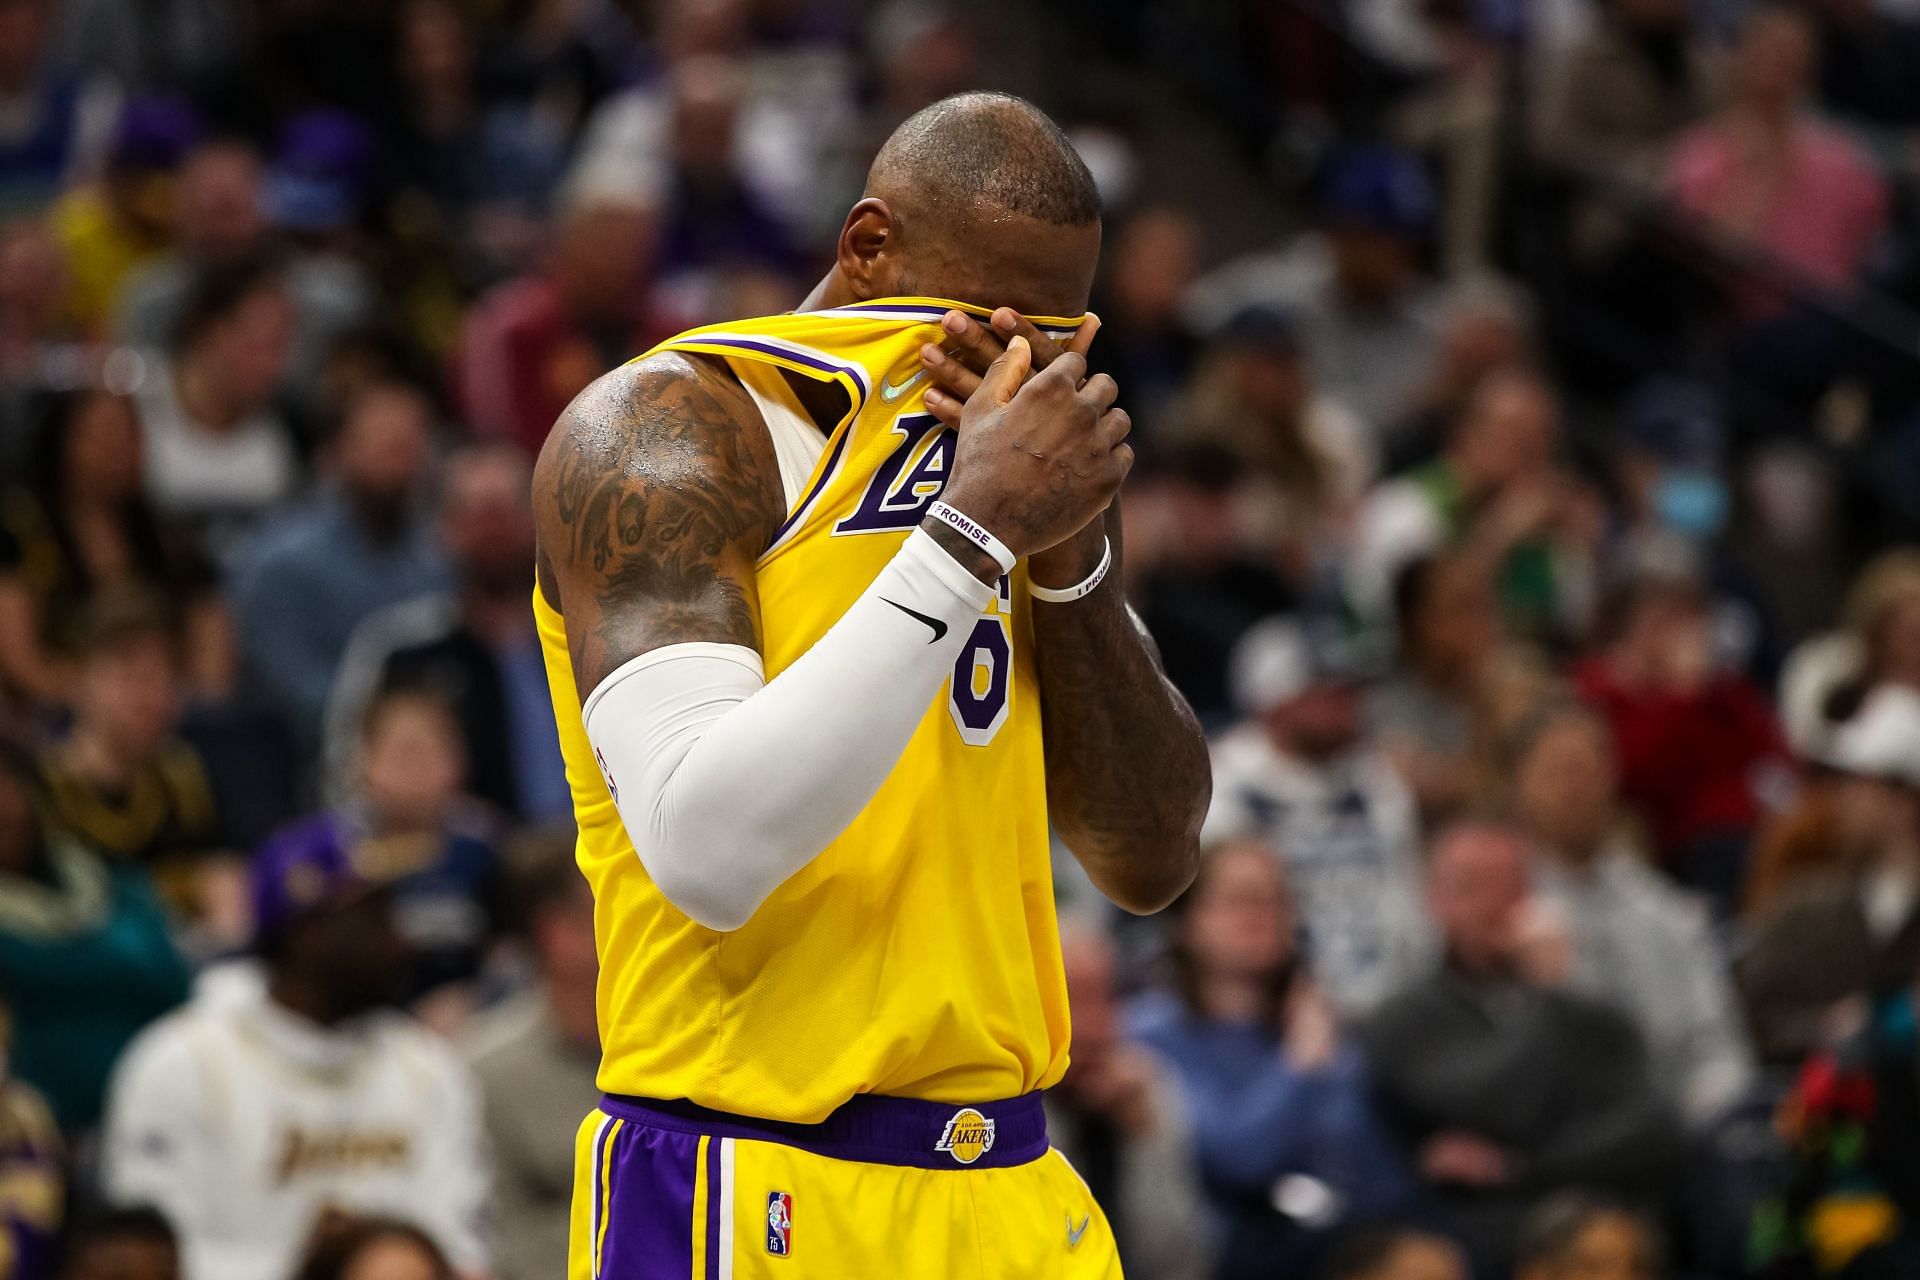 LeBron James of the LA Lakers wipes his face in the fourth quarter against the Minnesota Timberwolves on Wednesday in Minneapolis, Minnesota. The Timberwolves defeated the Lakers 124-104.